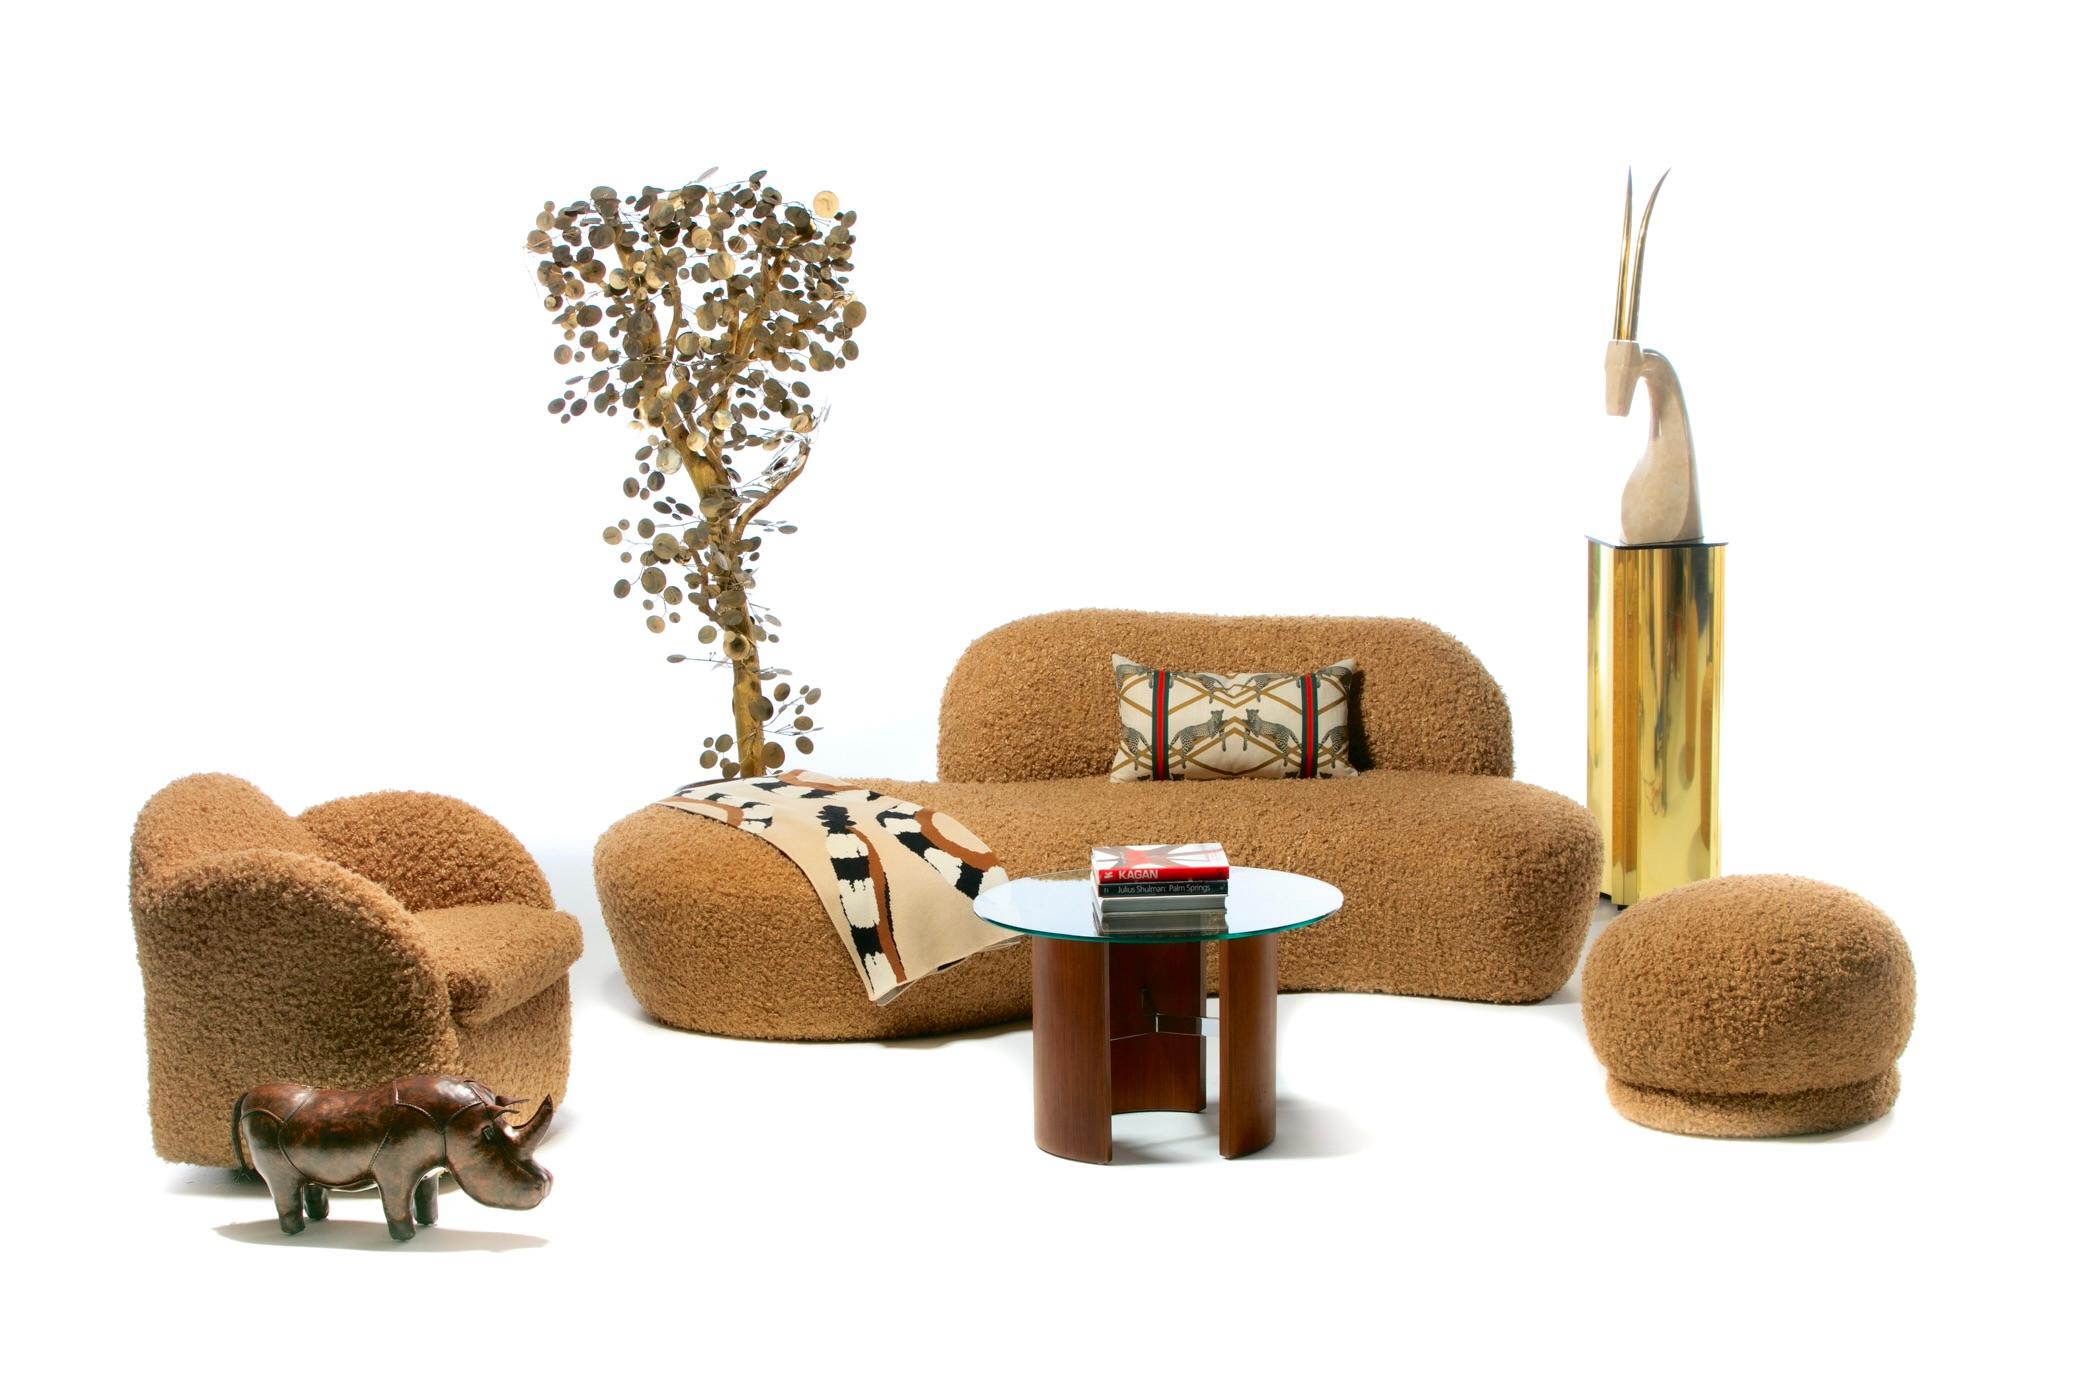 Everyone needs a teddy bear and yours can be this chic Vladimir Kagan Zoe sofa newly upholstered in soft curly camel teddy bear fabric. Modern. In your face sexy. Super soft teddy bear fabric immediately entices your curiosity and seduces your sense